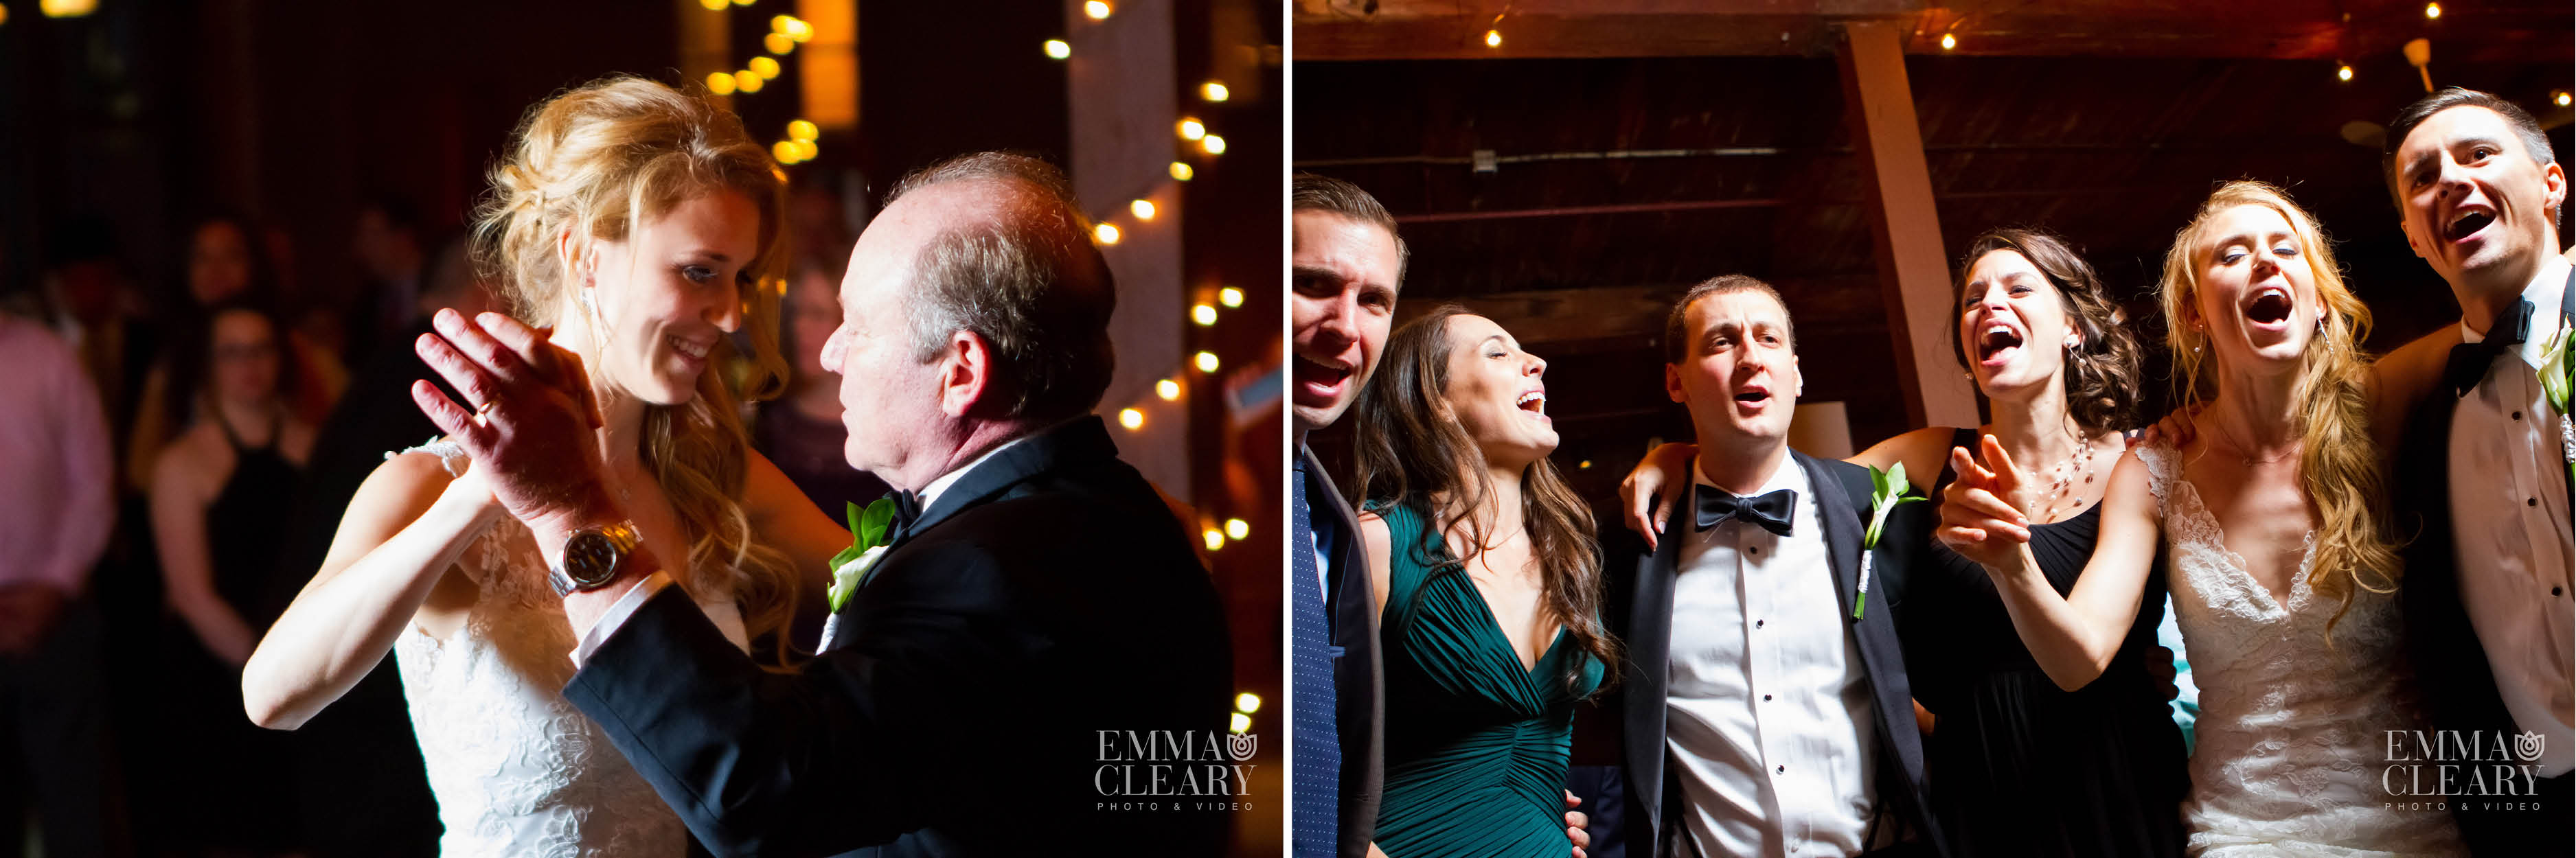 Emma_cleary_photography the Metropolitan Building wedding26